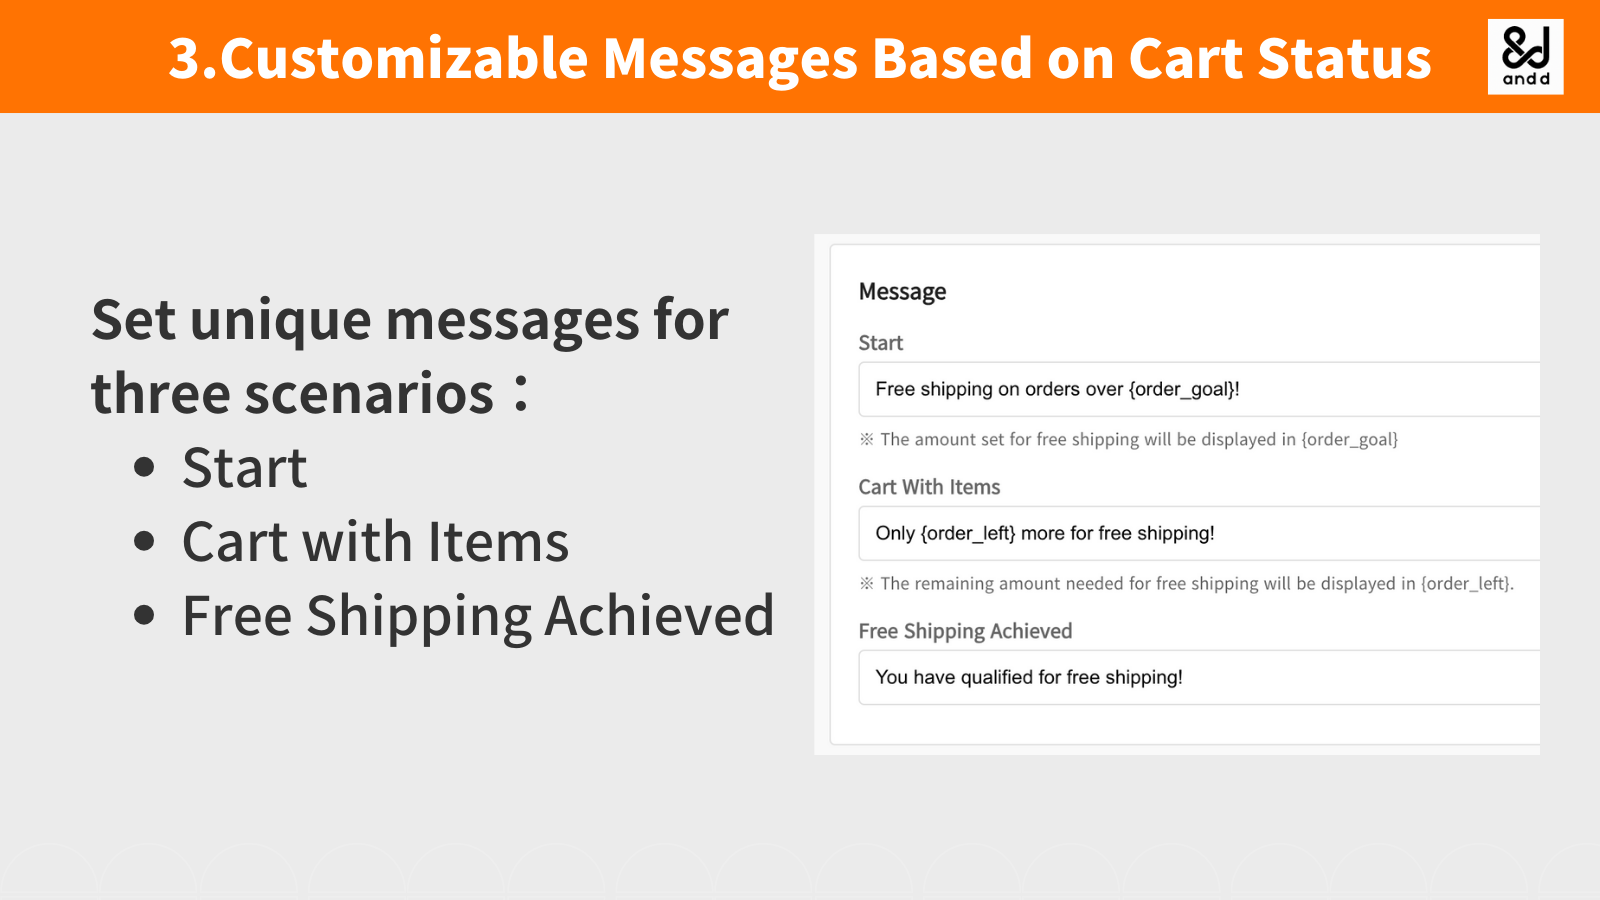 Customizable Messages Based on Cart Status